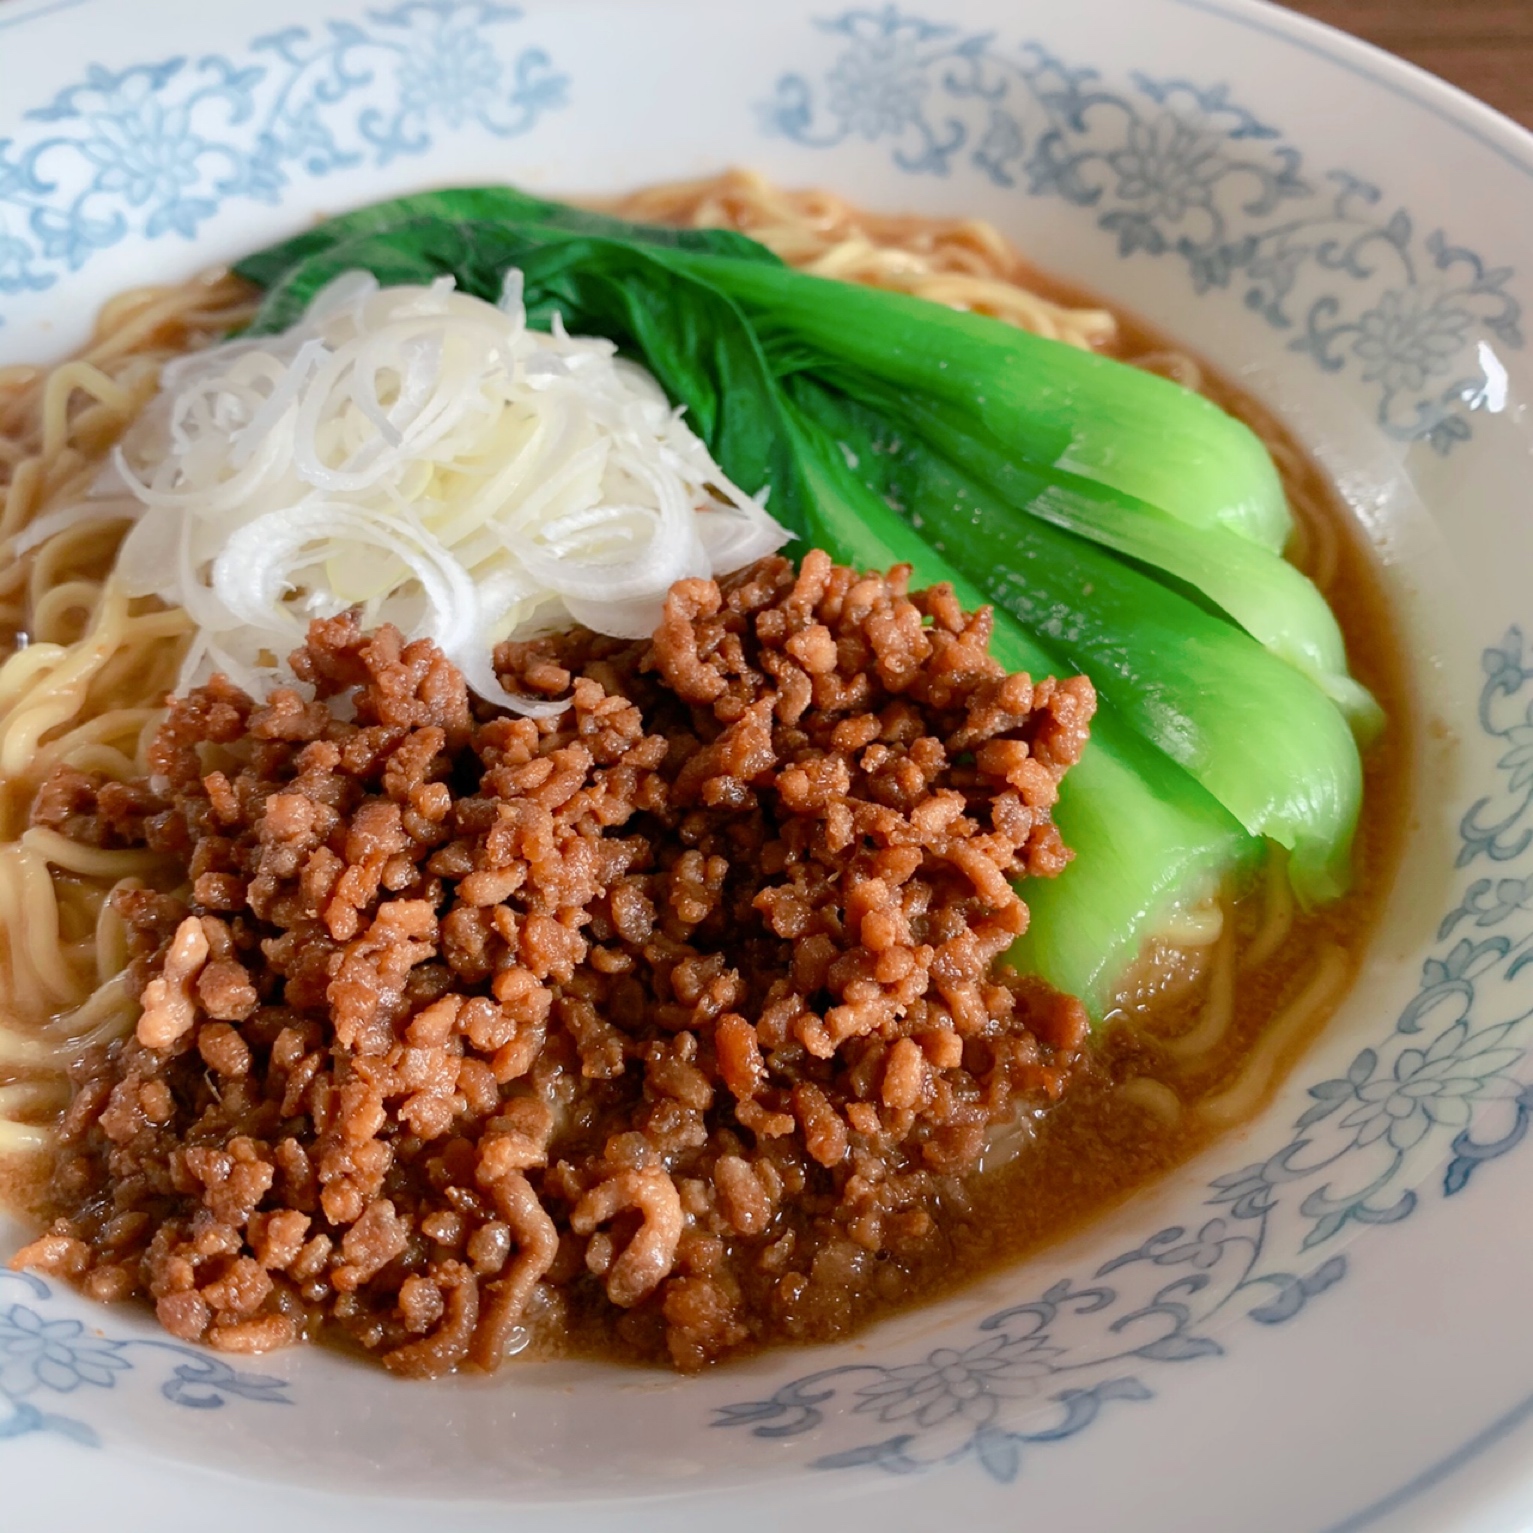 A delicious noodle dish with garlic and ginger flavored meat miso and rich sesame paste soup.